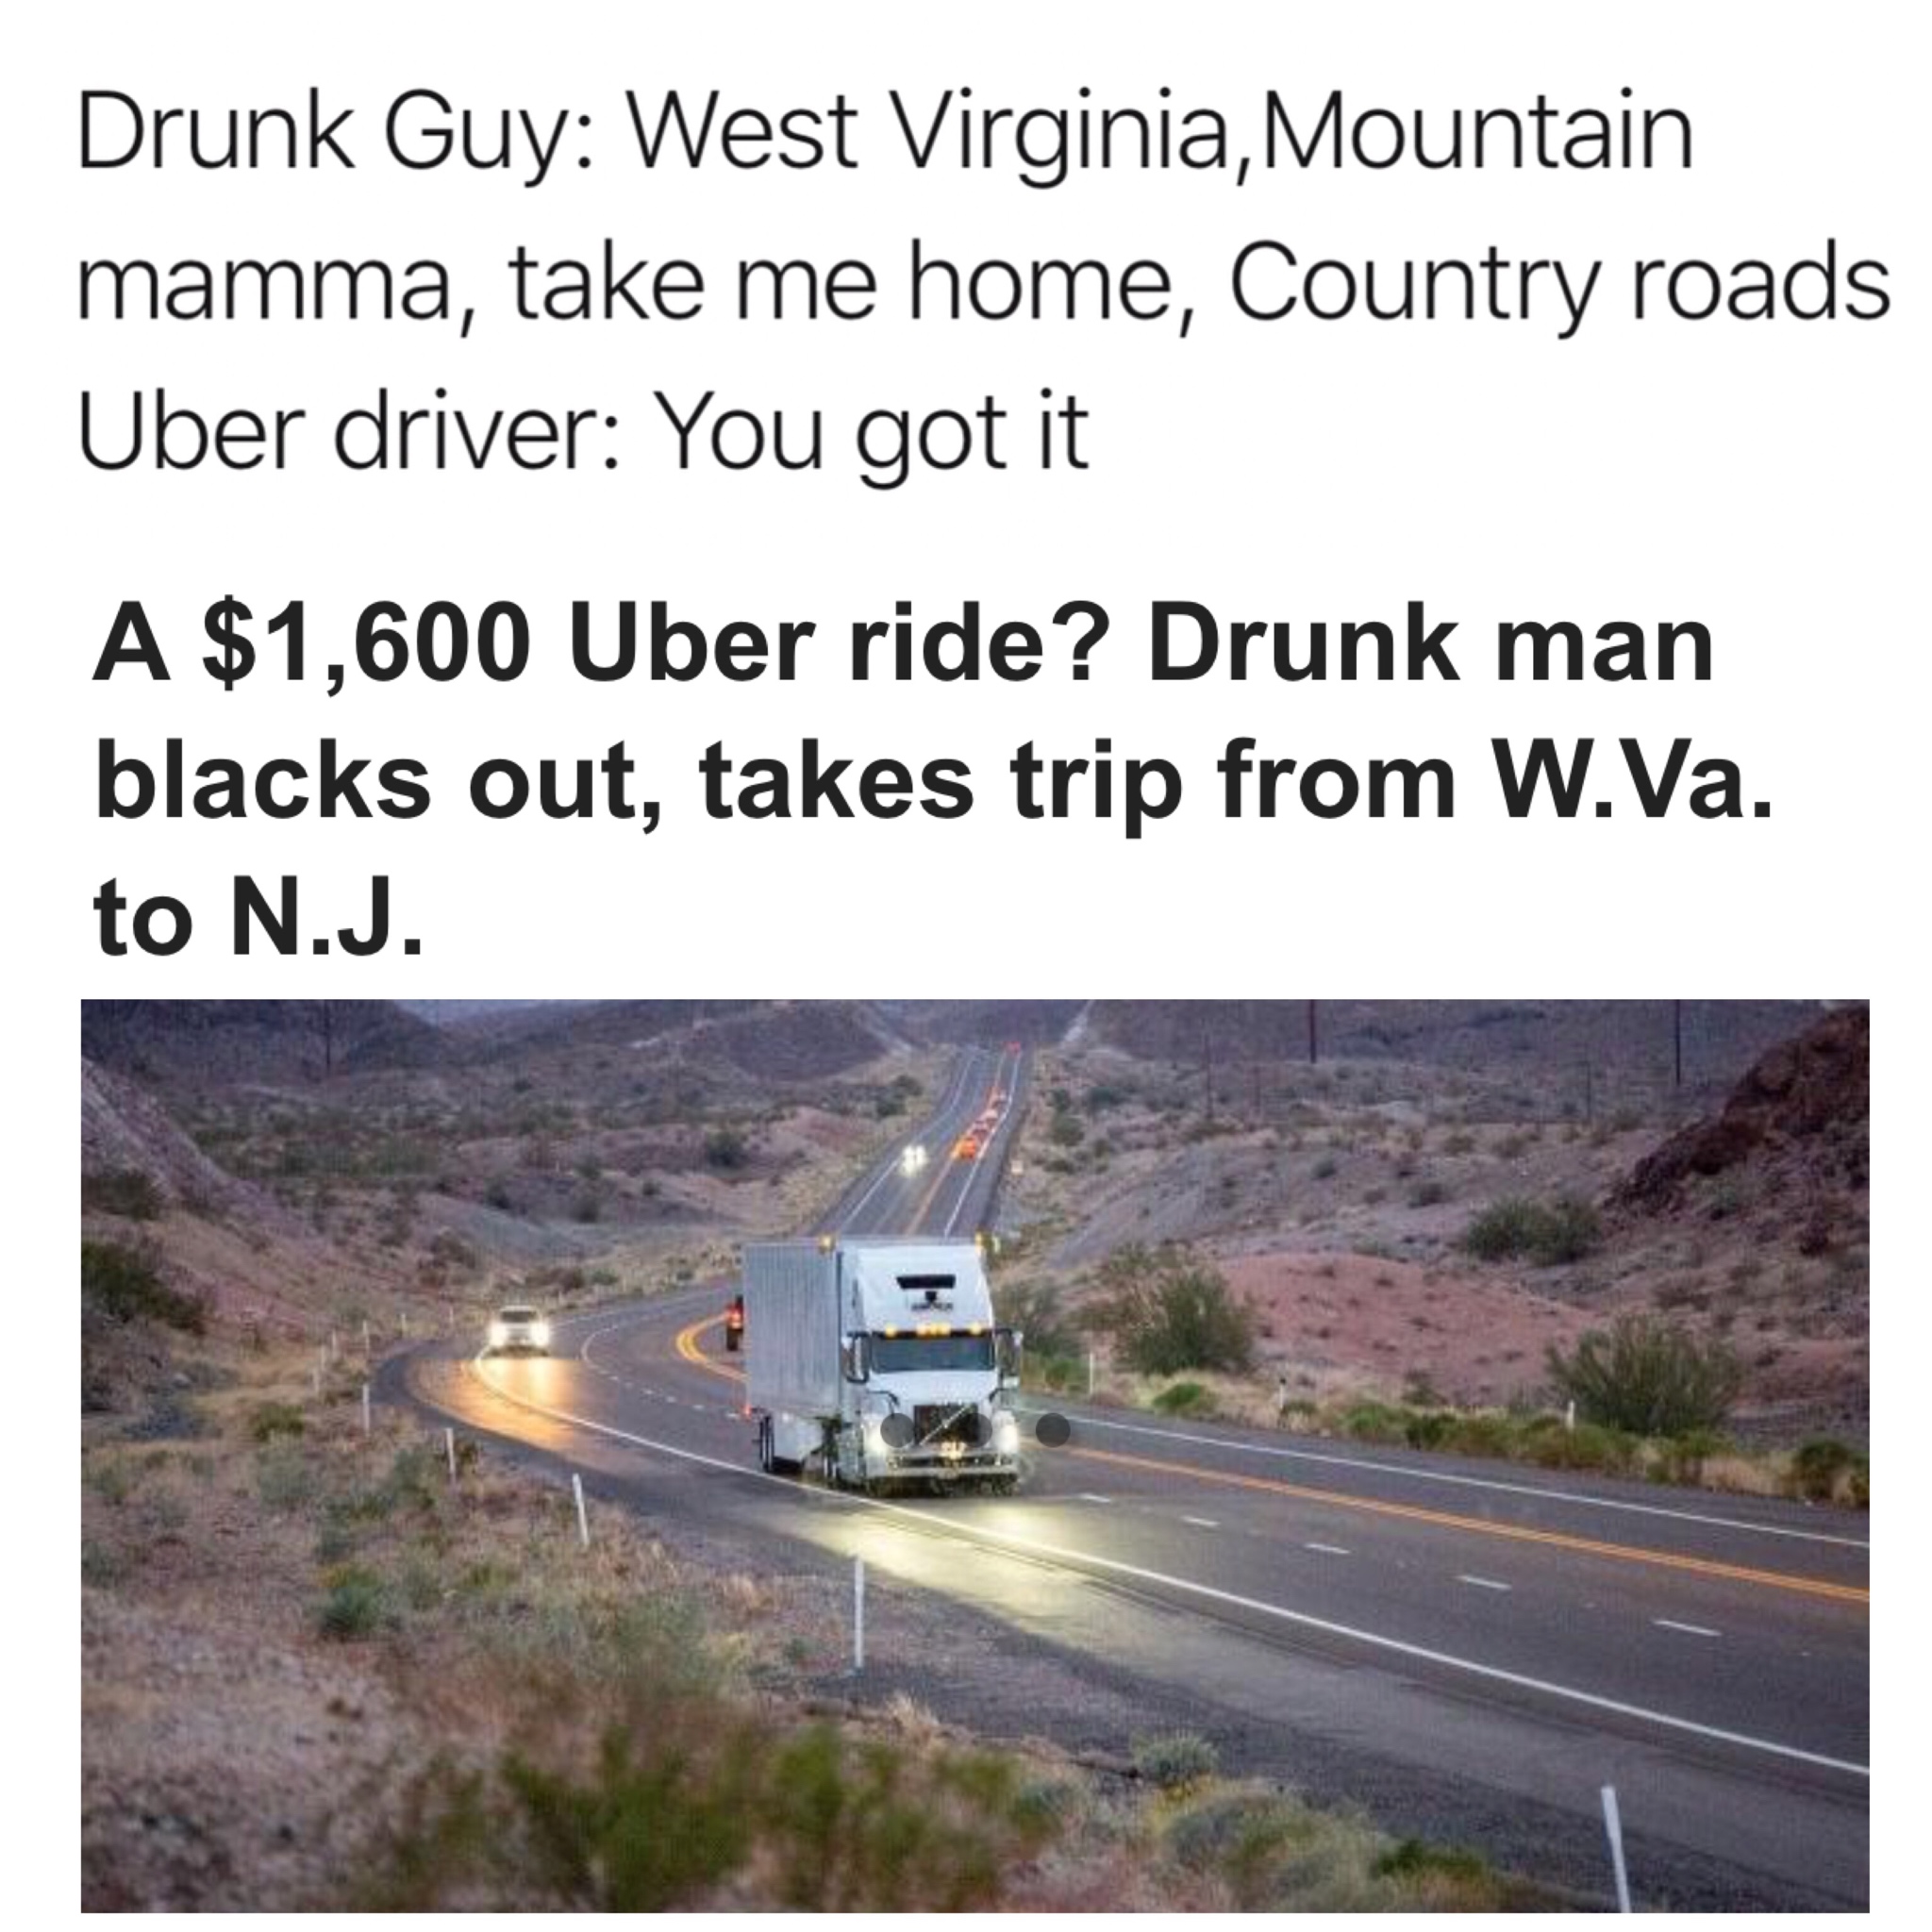 dank country roads uber meme - Drunk Guy West Virginia, Mountain mamma, take me home, Country roads Uber driver You got it A $1,600 Uber ride? Drunk man blacks out, takes trip from W.Va. to N.J.